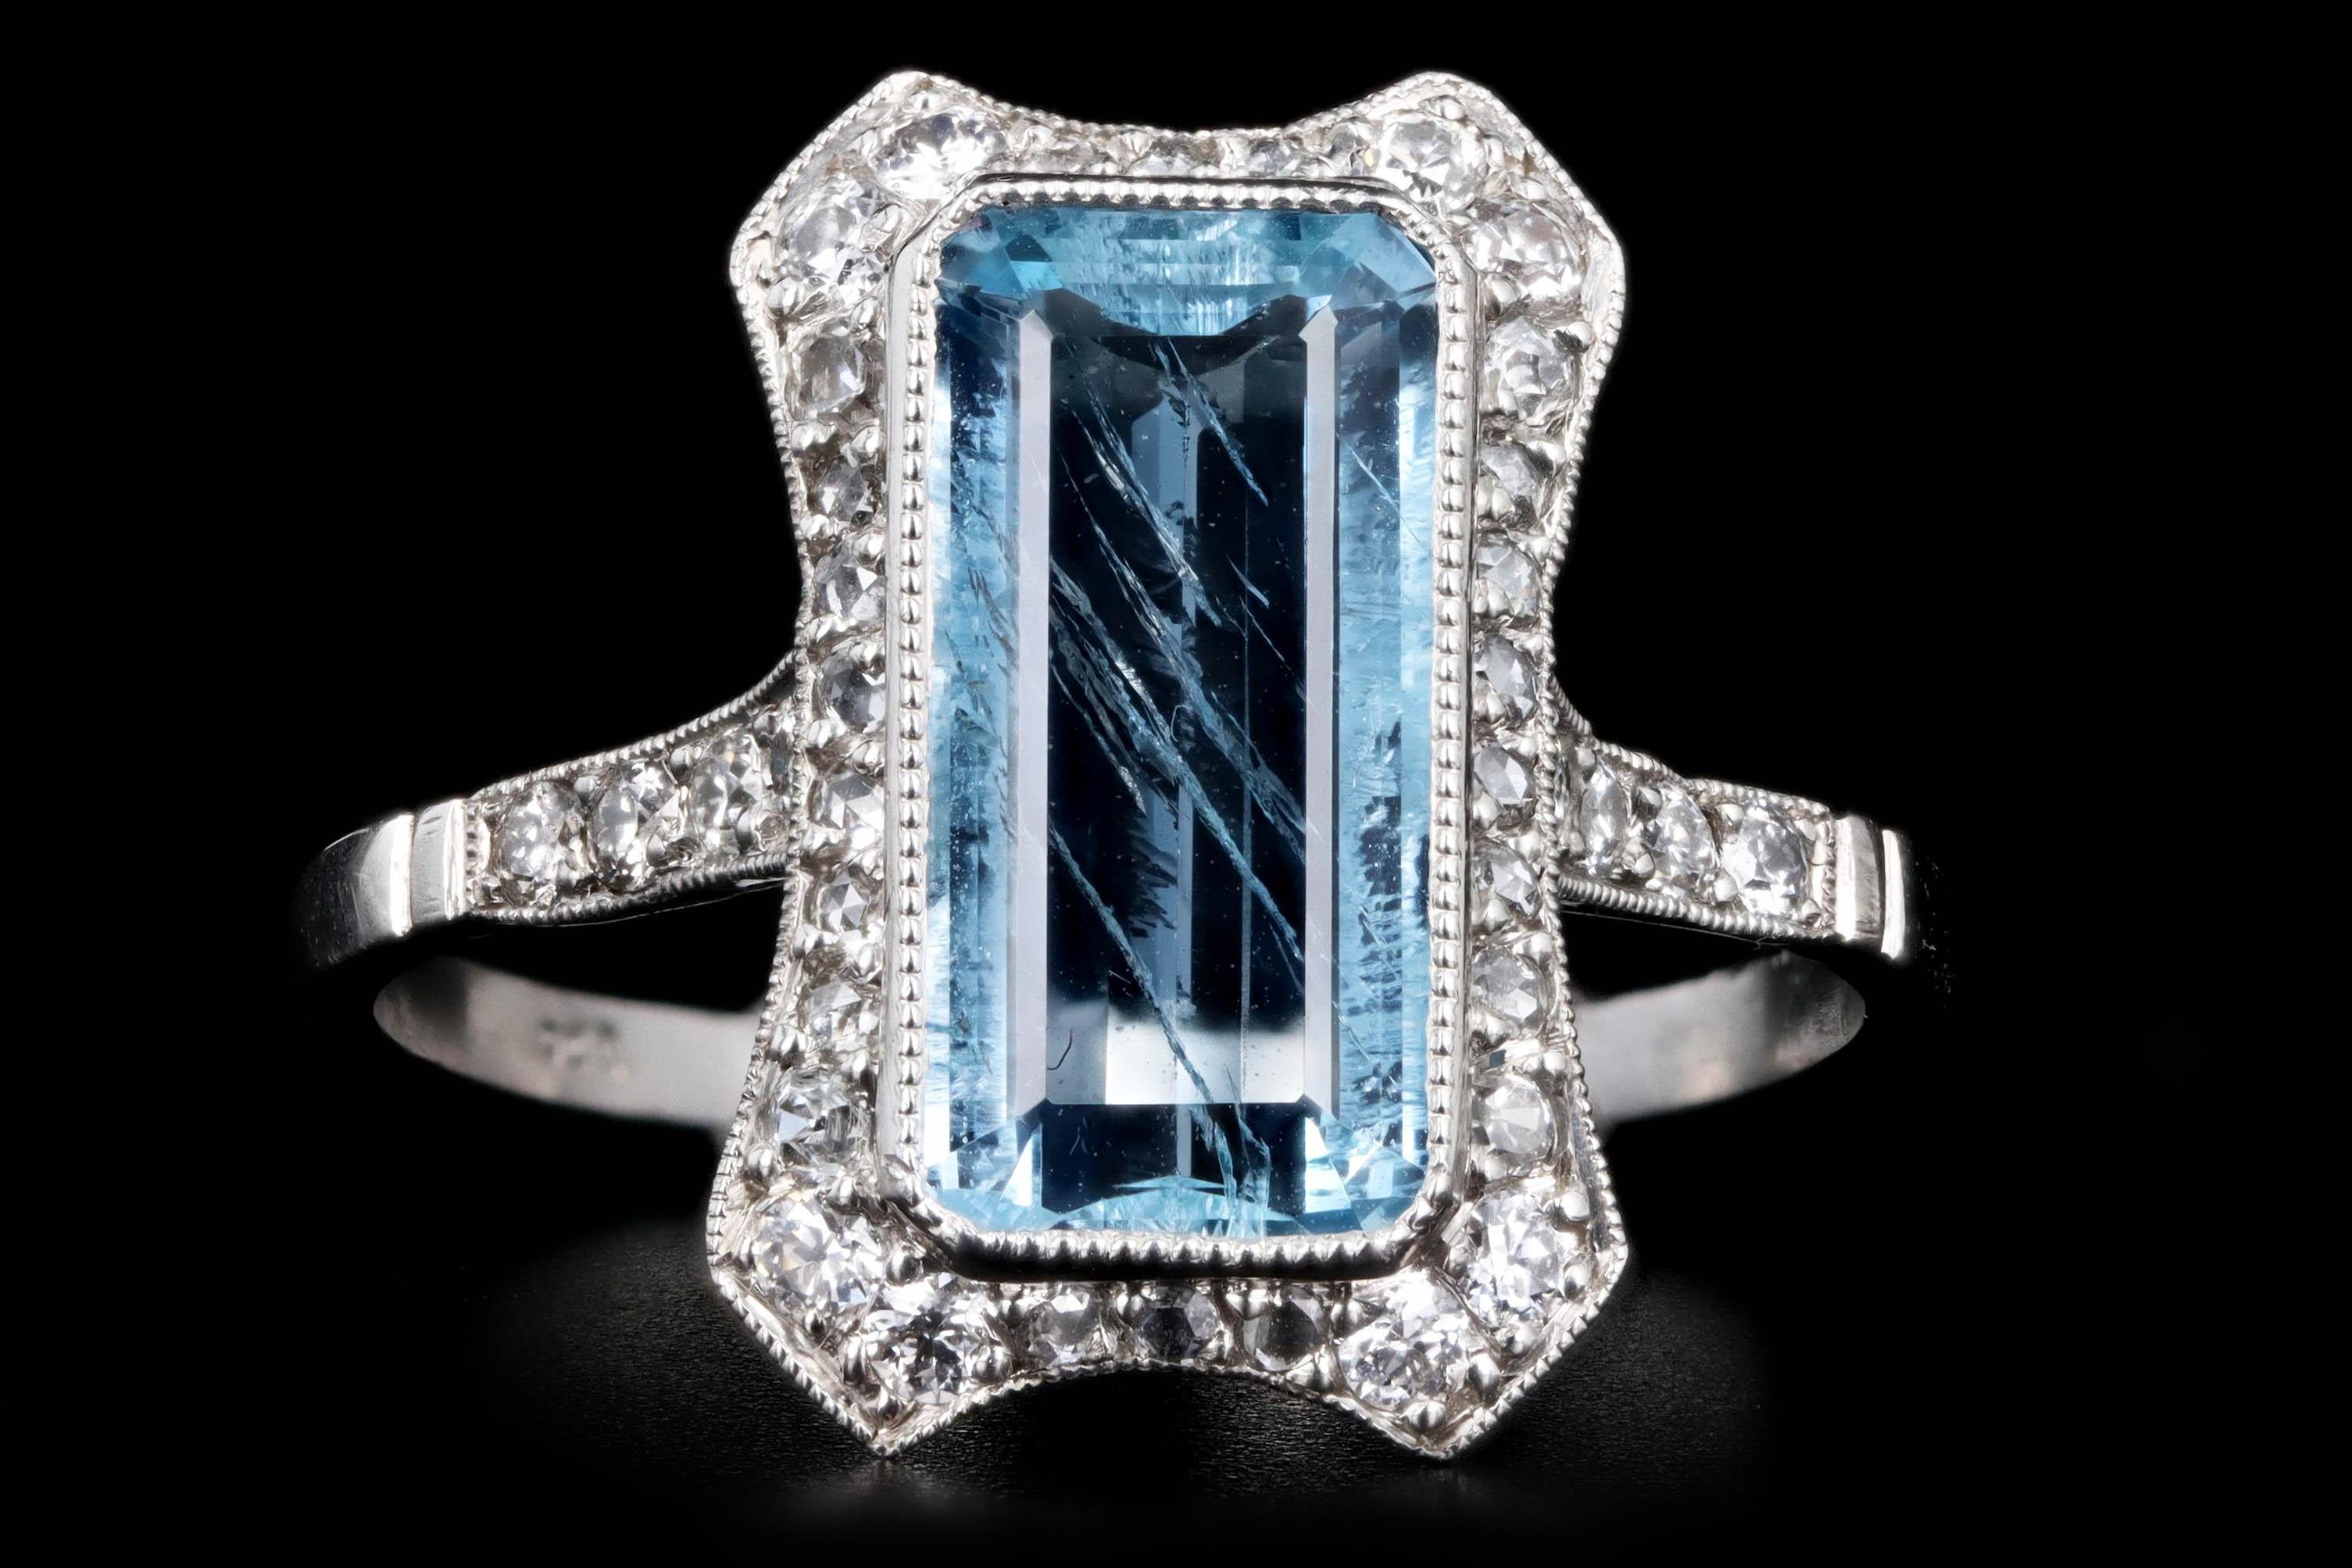 Era: Art Deco Inspired

Composition: Platinum

Primary Stone: Aquamarine

Carat Weight: Approximately 2.18 Carats

Accent Stone: Thirty Eight Old European Cut Diamonds

Carat Weight: Approximately .25 Carats in Total

Color/Clarity: G-H /